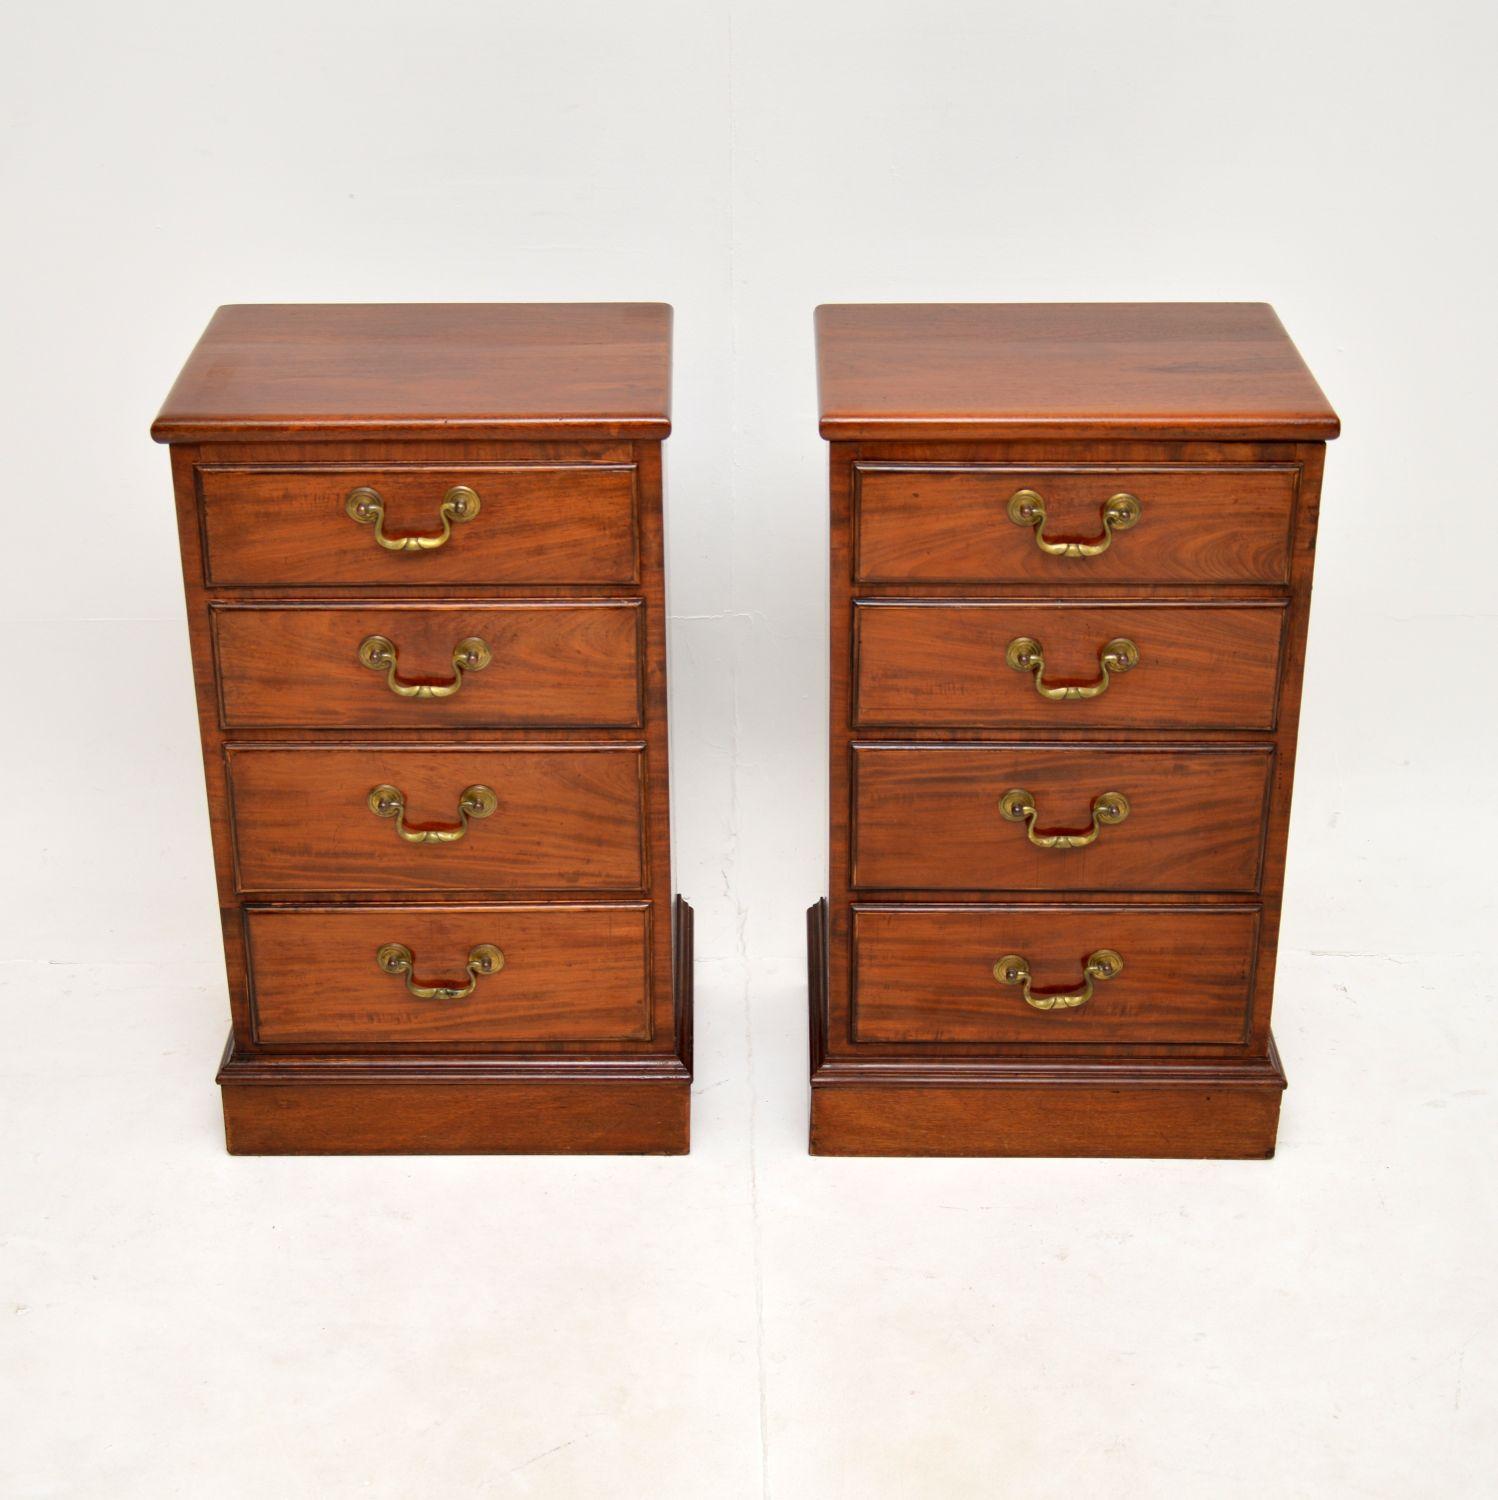 A smart and very well made pair of antique bedside chests. They were made in England, they date from around the 1900-1910 period.

They are of lovely quality and are a very useful size. The wood has a gorgeous colour tone, each has four drawers with